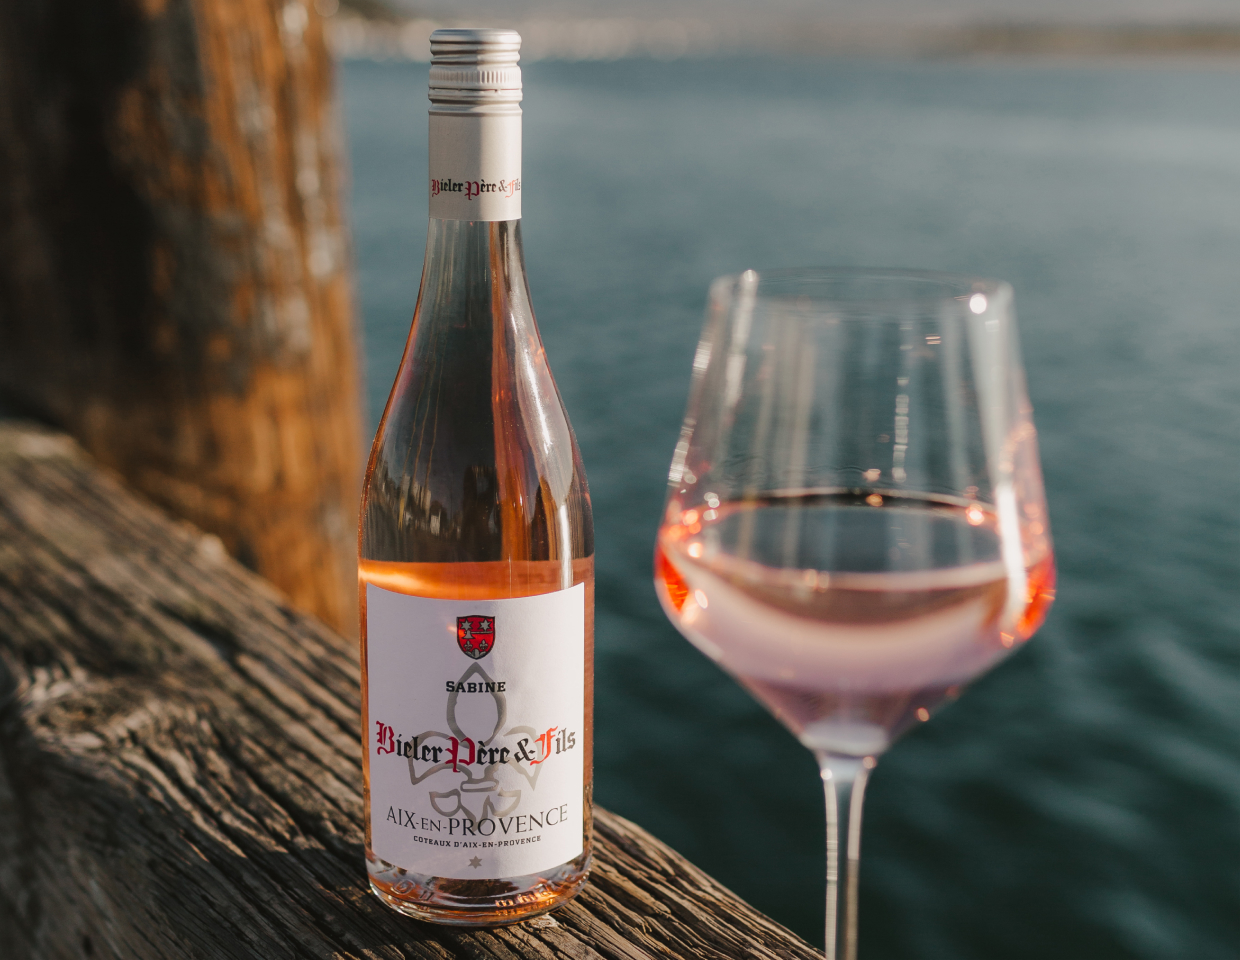 Bottle and glass of Bieler Pere & Fils Sabine Rose by the ocean.